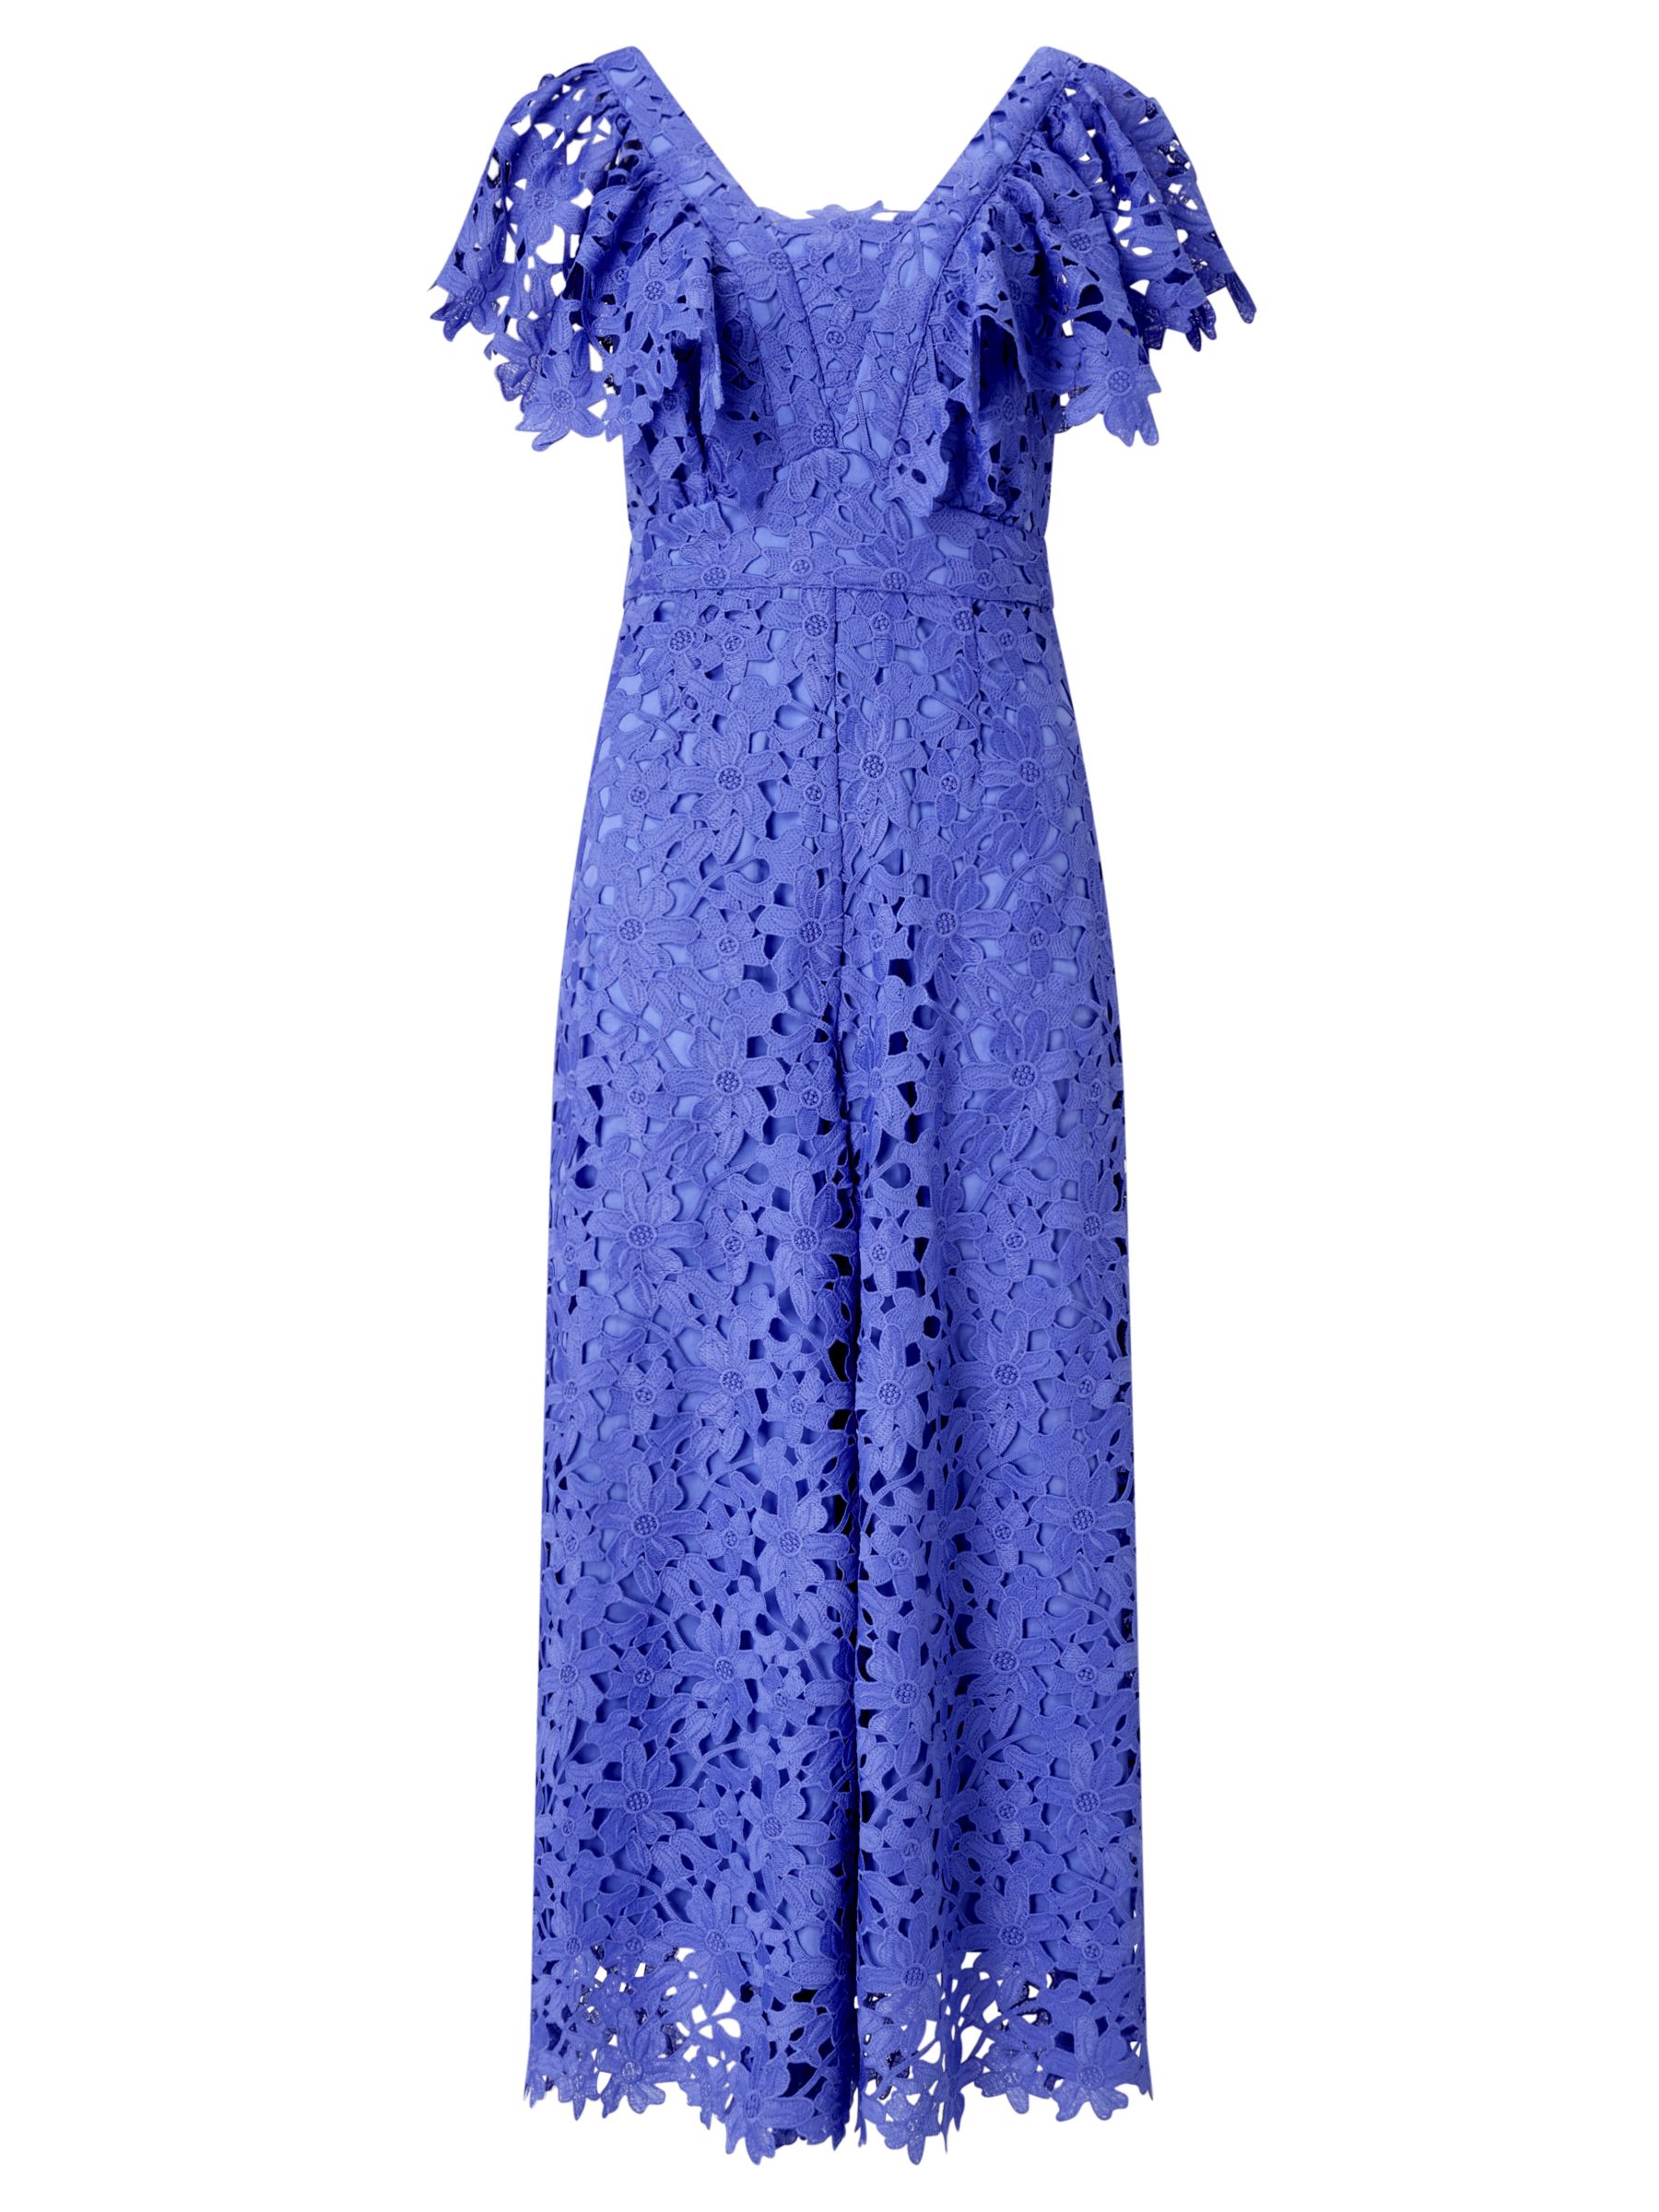 Somerset by Alice Temperley Lace Frill Jumpsuit, Blue